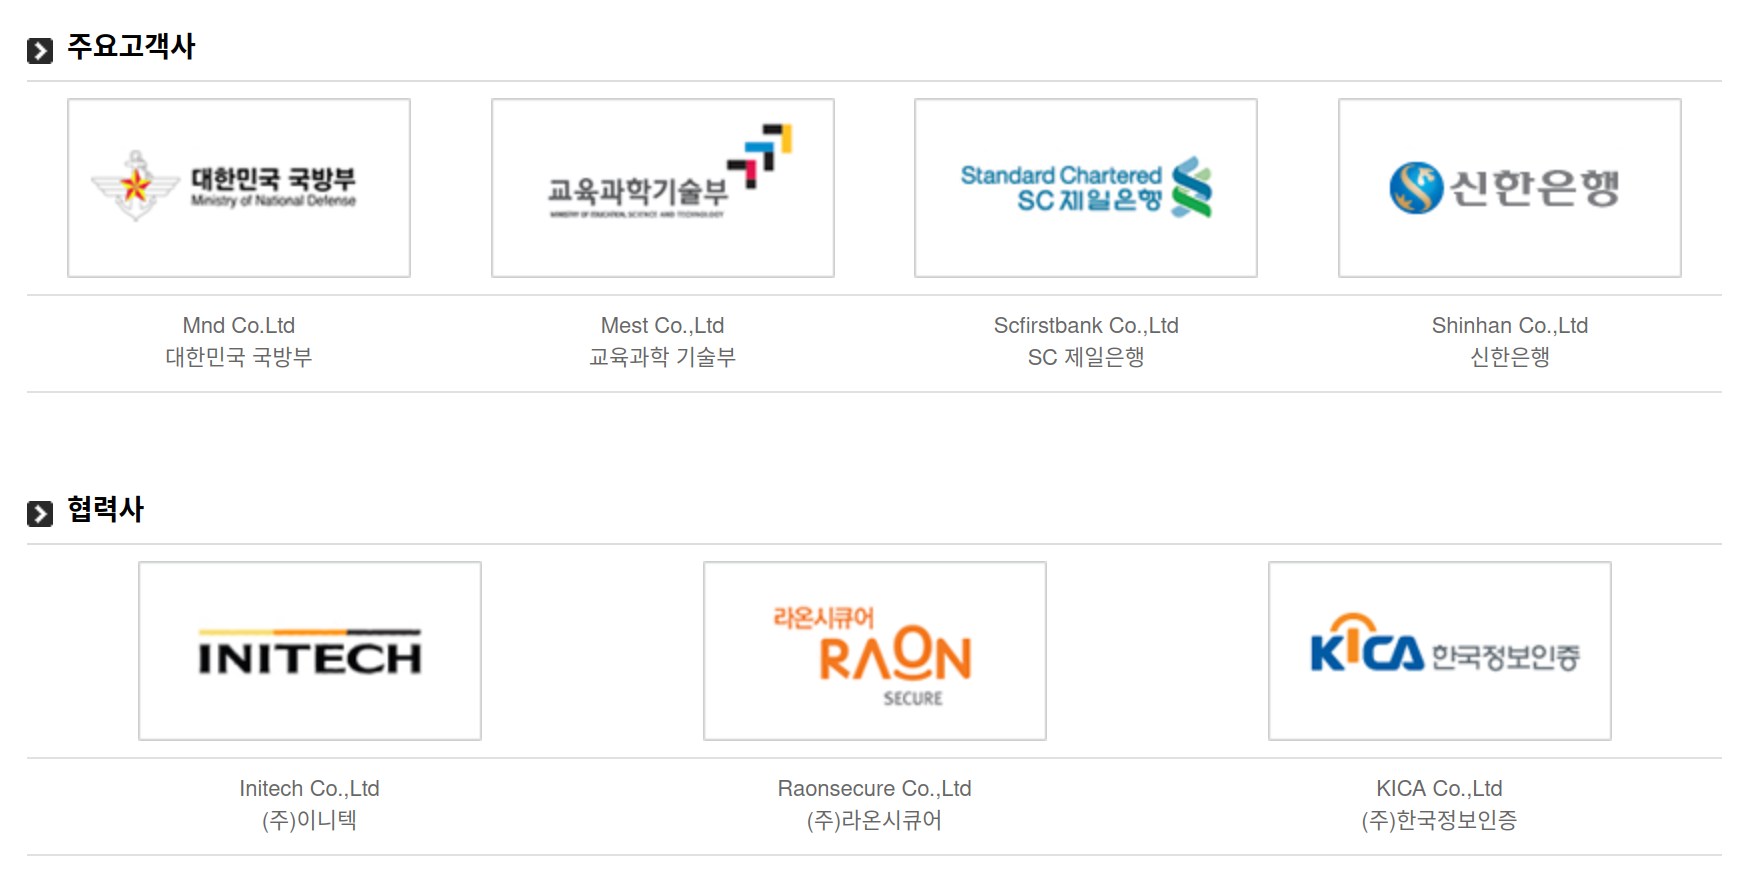 A web page featuring Initech and RaonSecure logos among others.